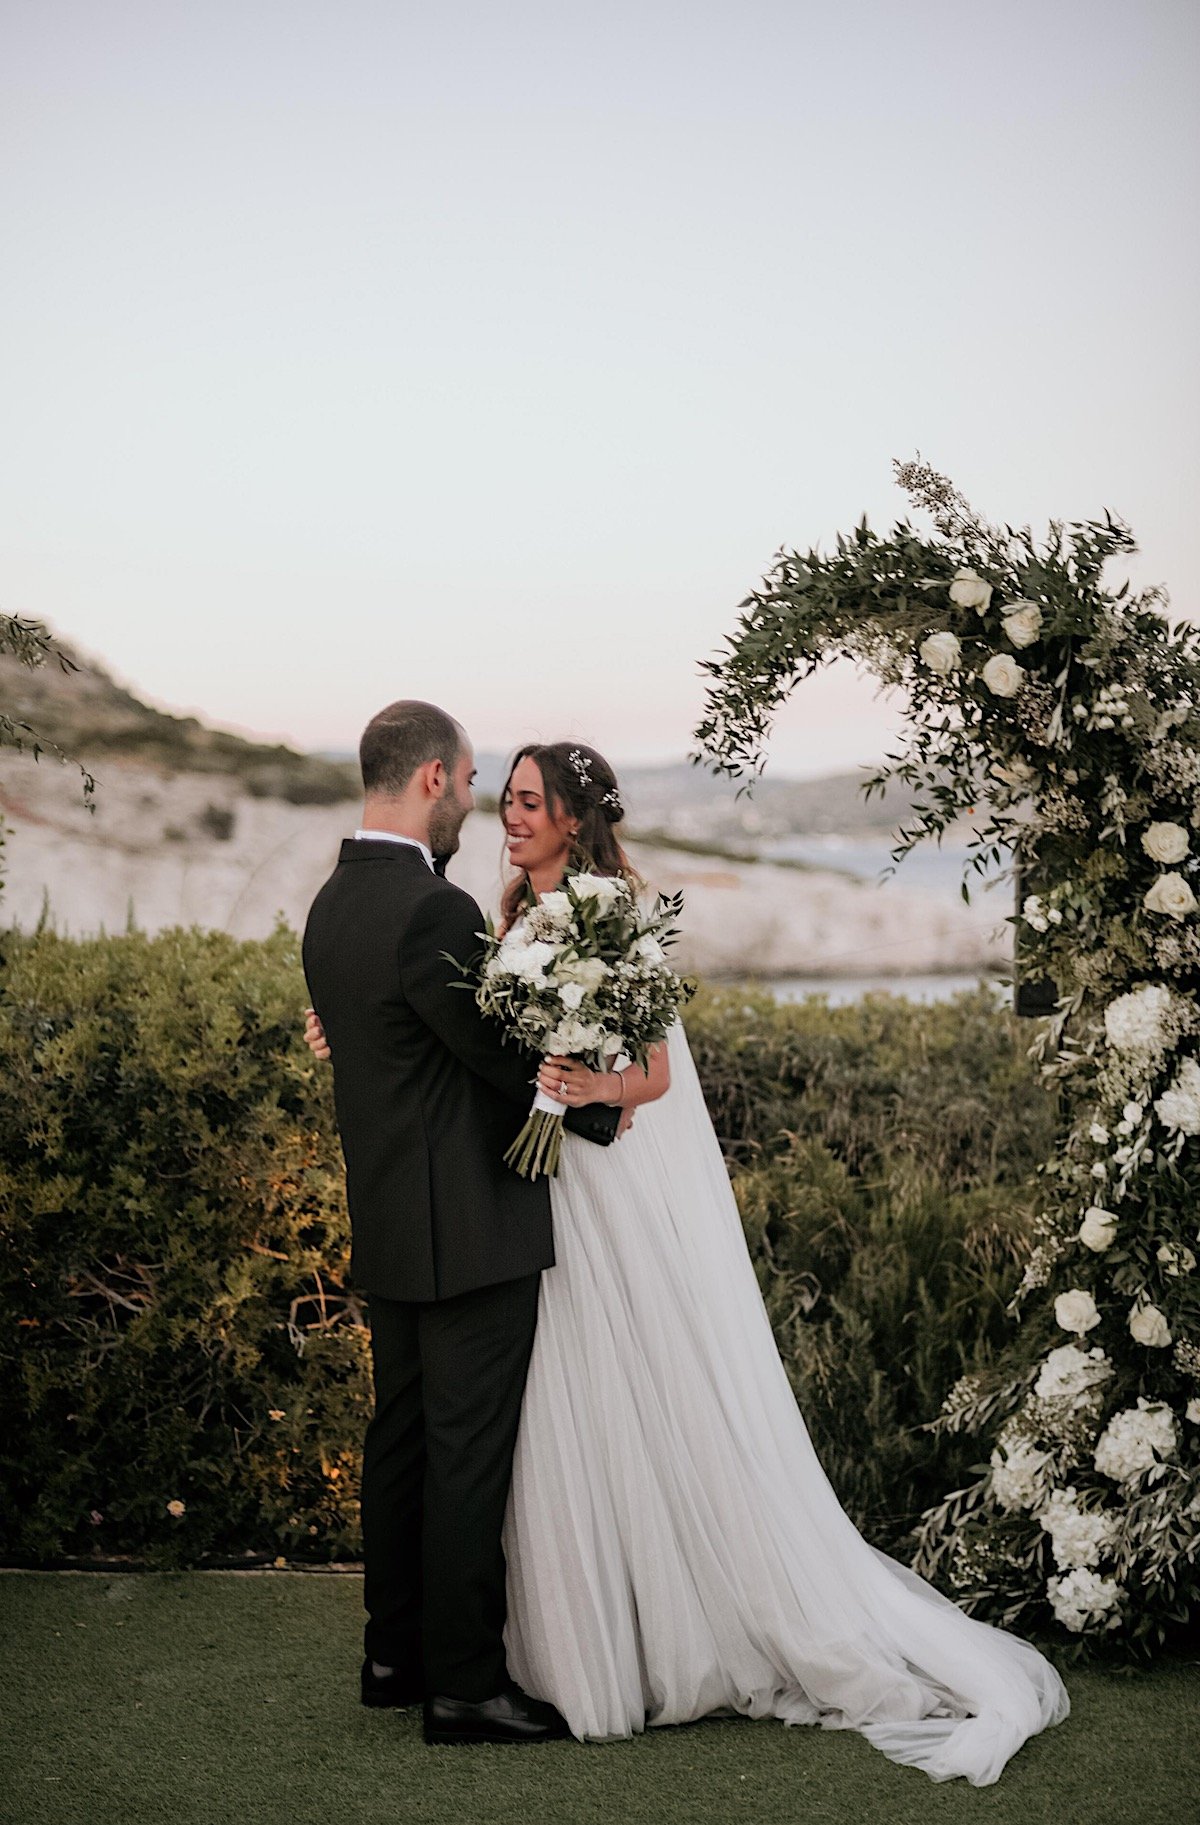 Timeless golden hour wedding photography in Athens, Greece